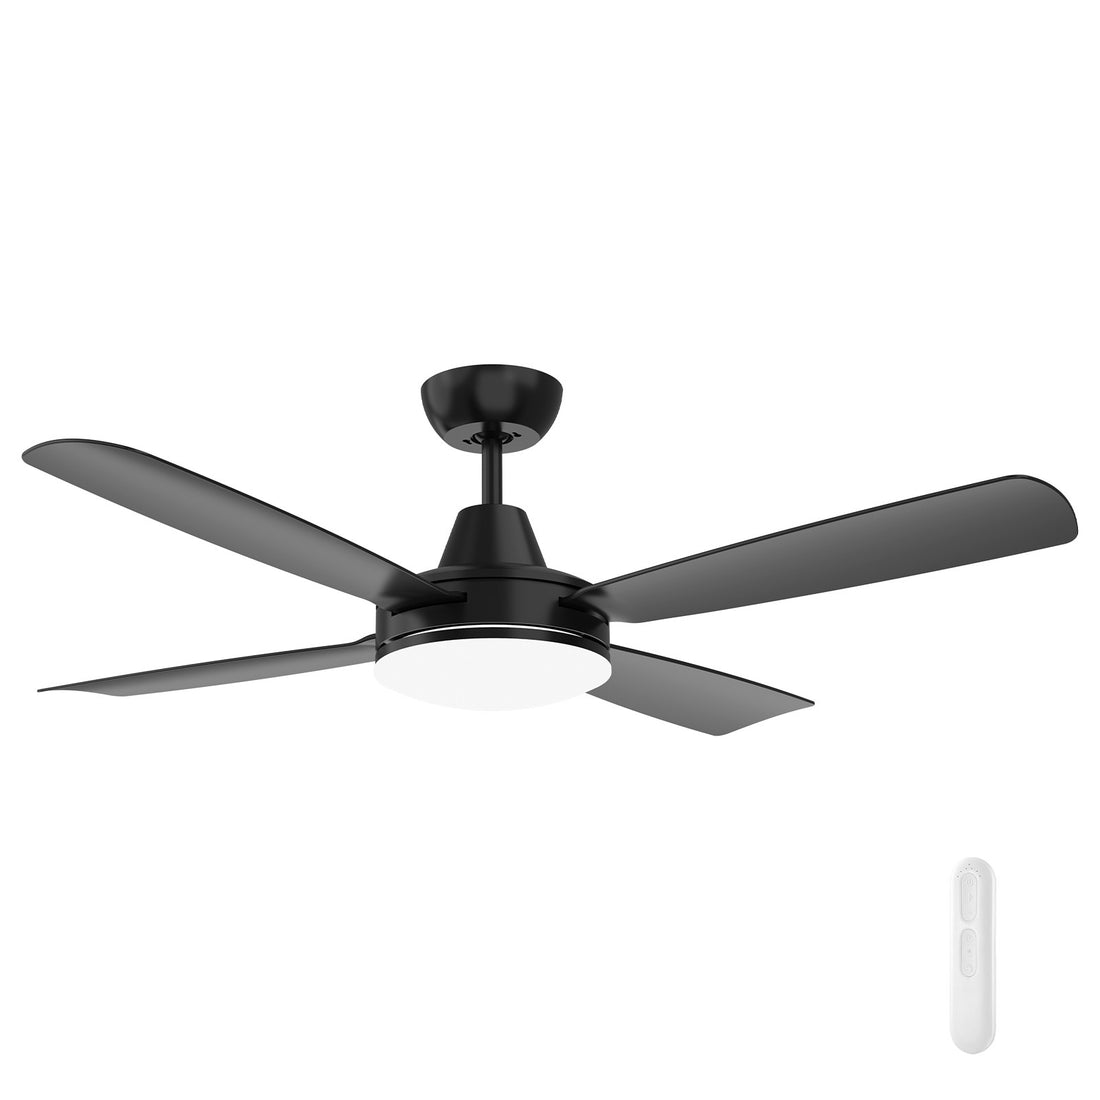 Nemoi Lite 122cm DC Ceiling Fan with LED Light and Remote